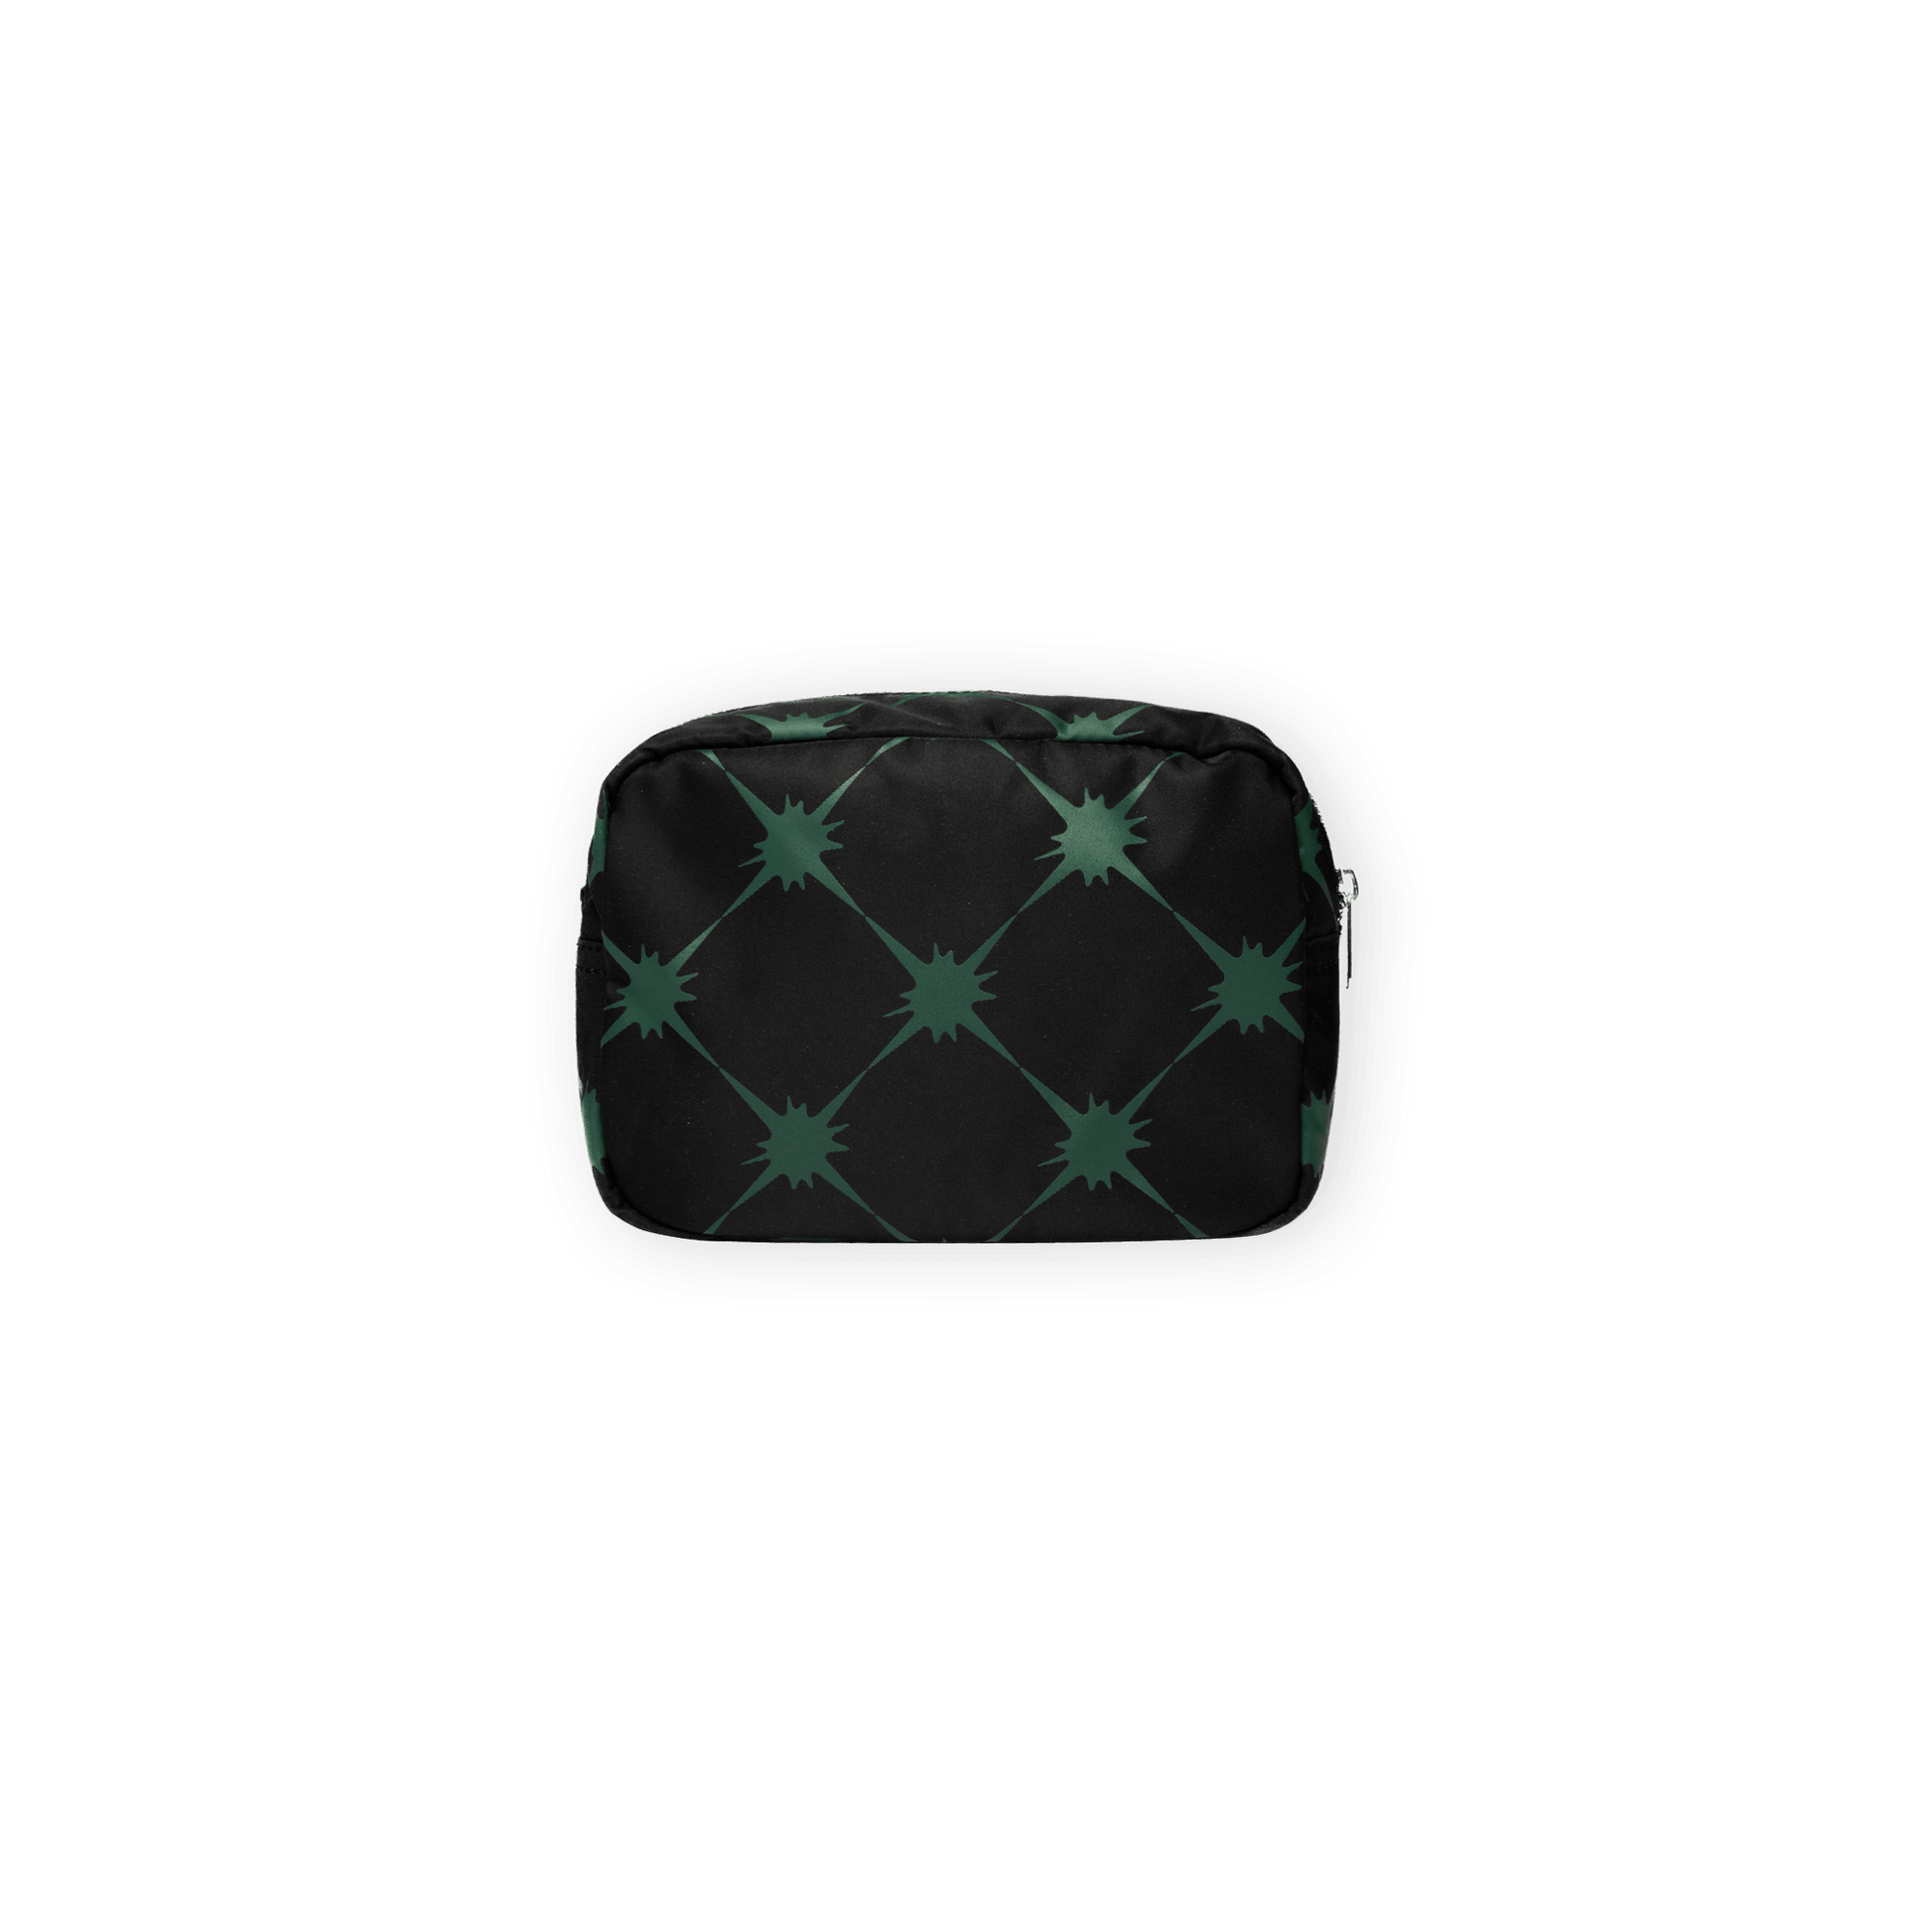 STARFIELD TRAVEL POUCH - SMALL - Billionaire Girls Club Exclusives